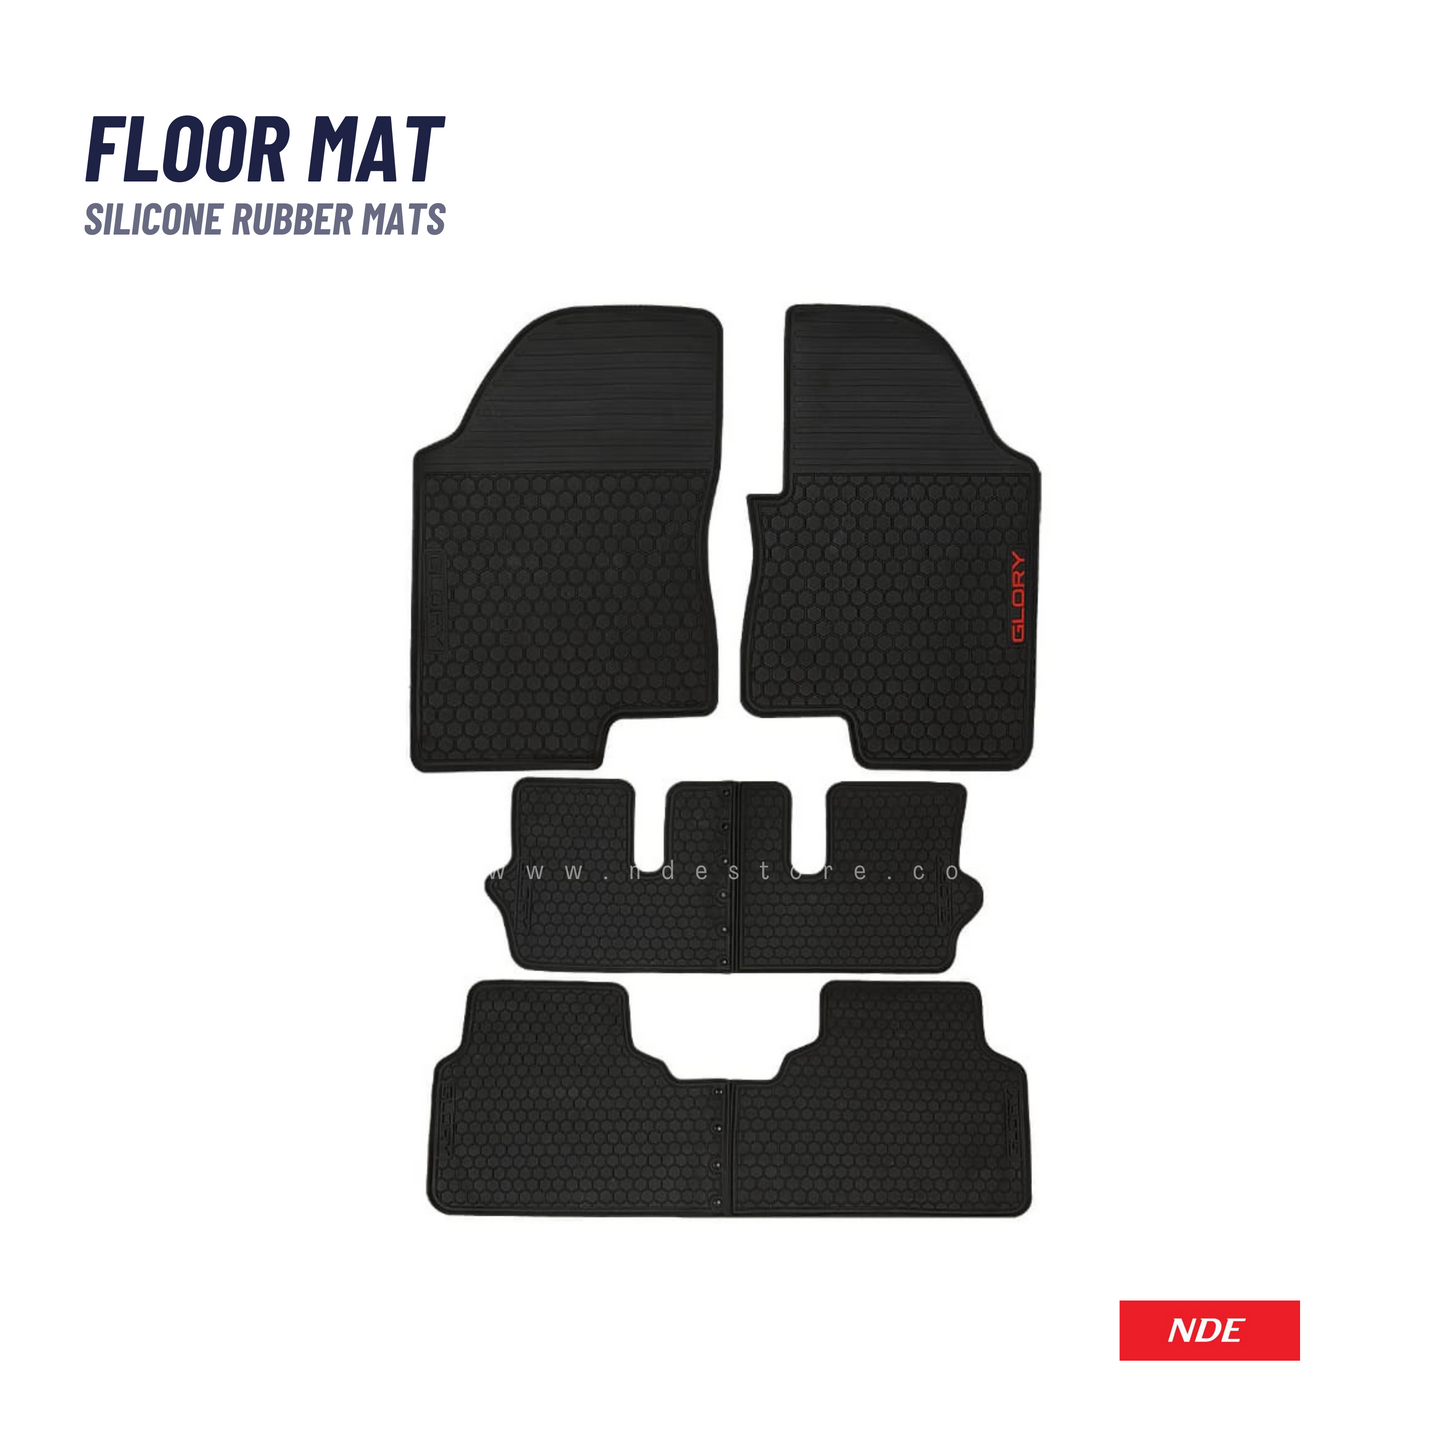 FLOOR MAT RUBBER / LATEX ANTI SLIP SILICONE FOR GLORY 580 PRO (2020-2022)